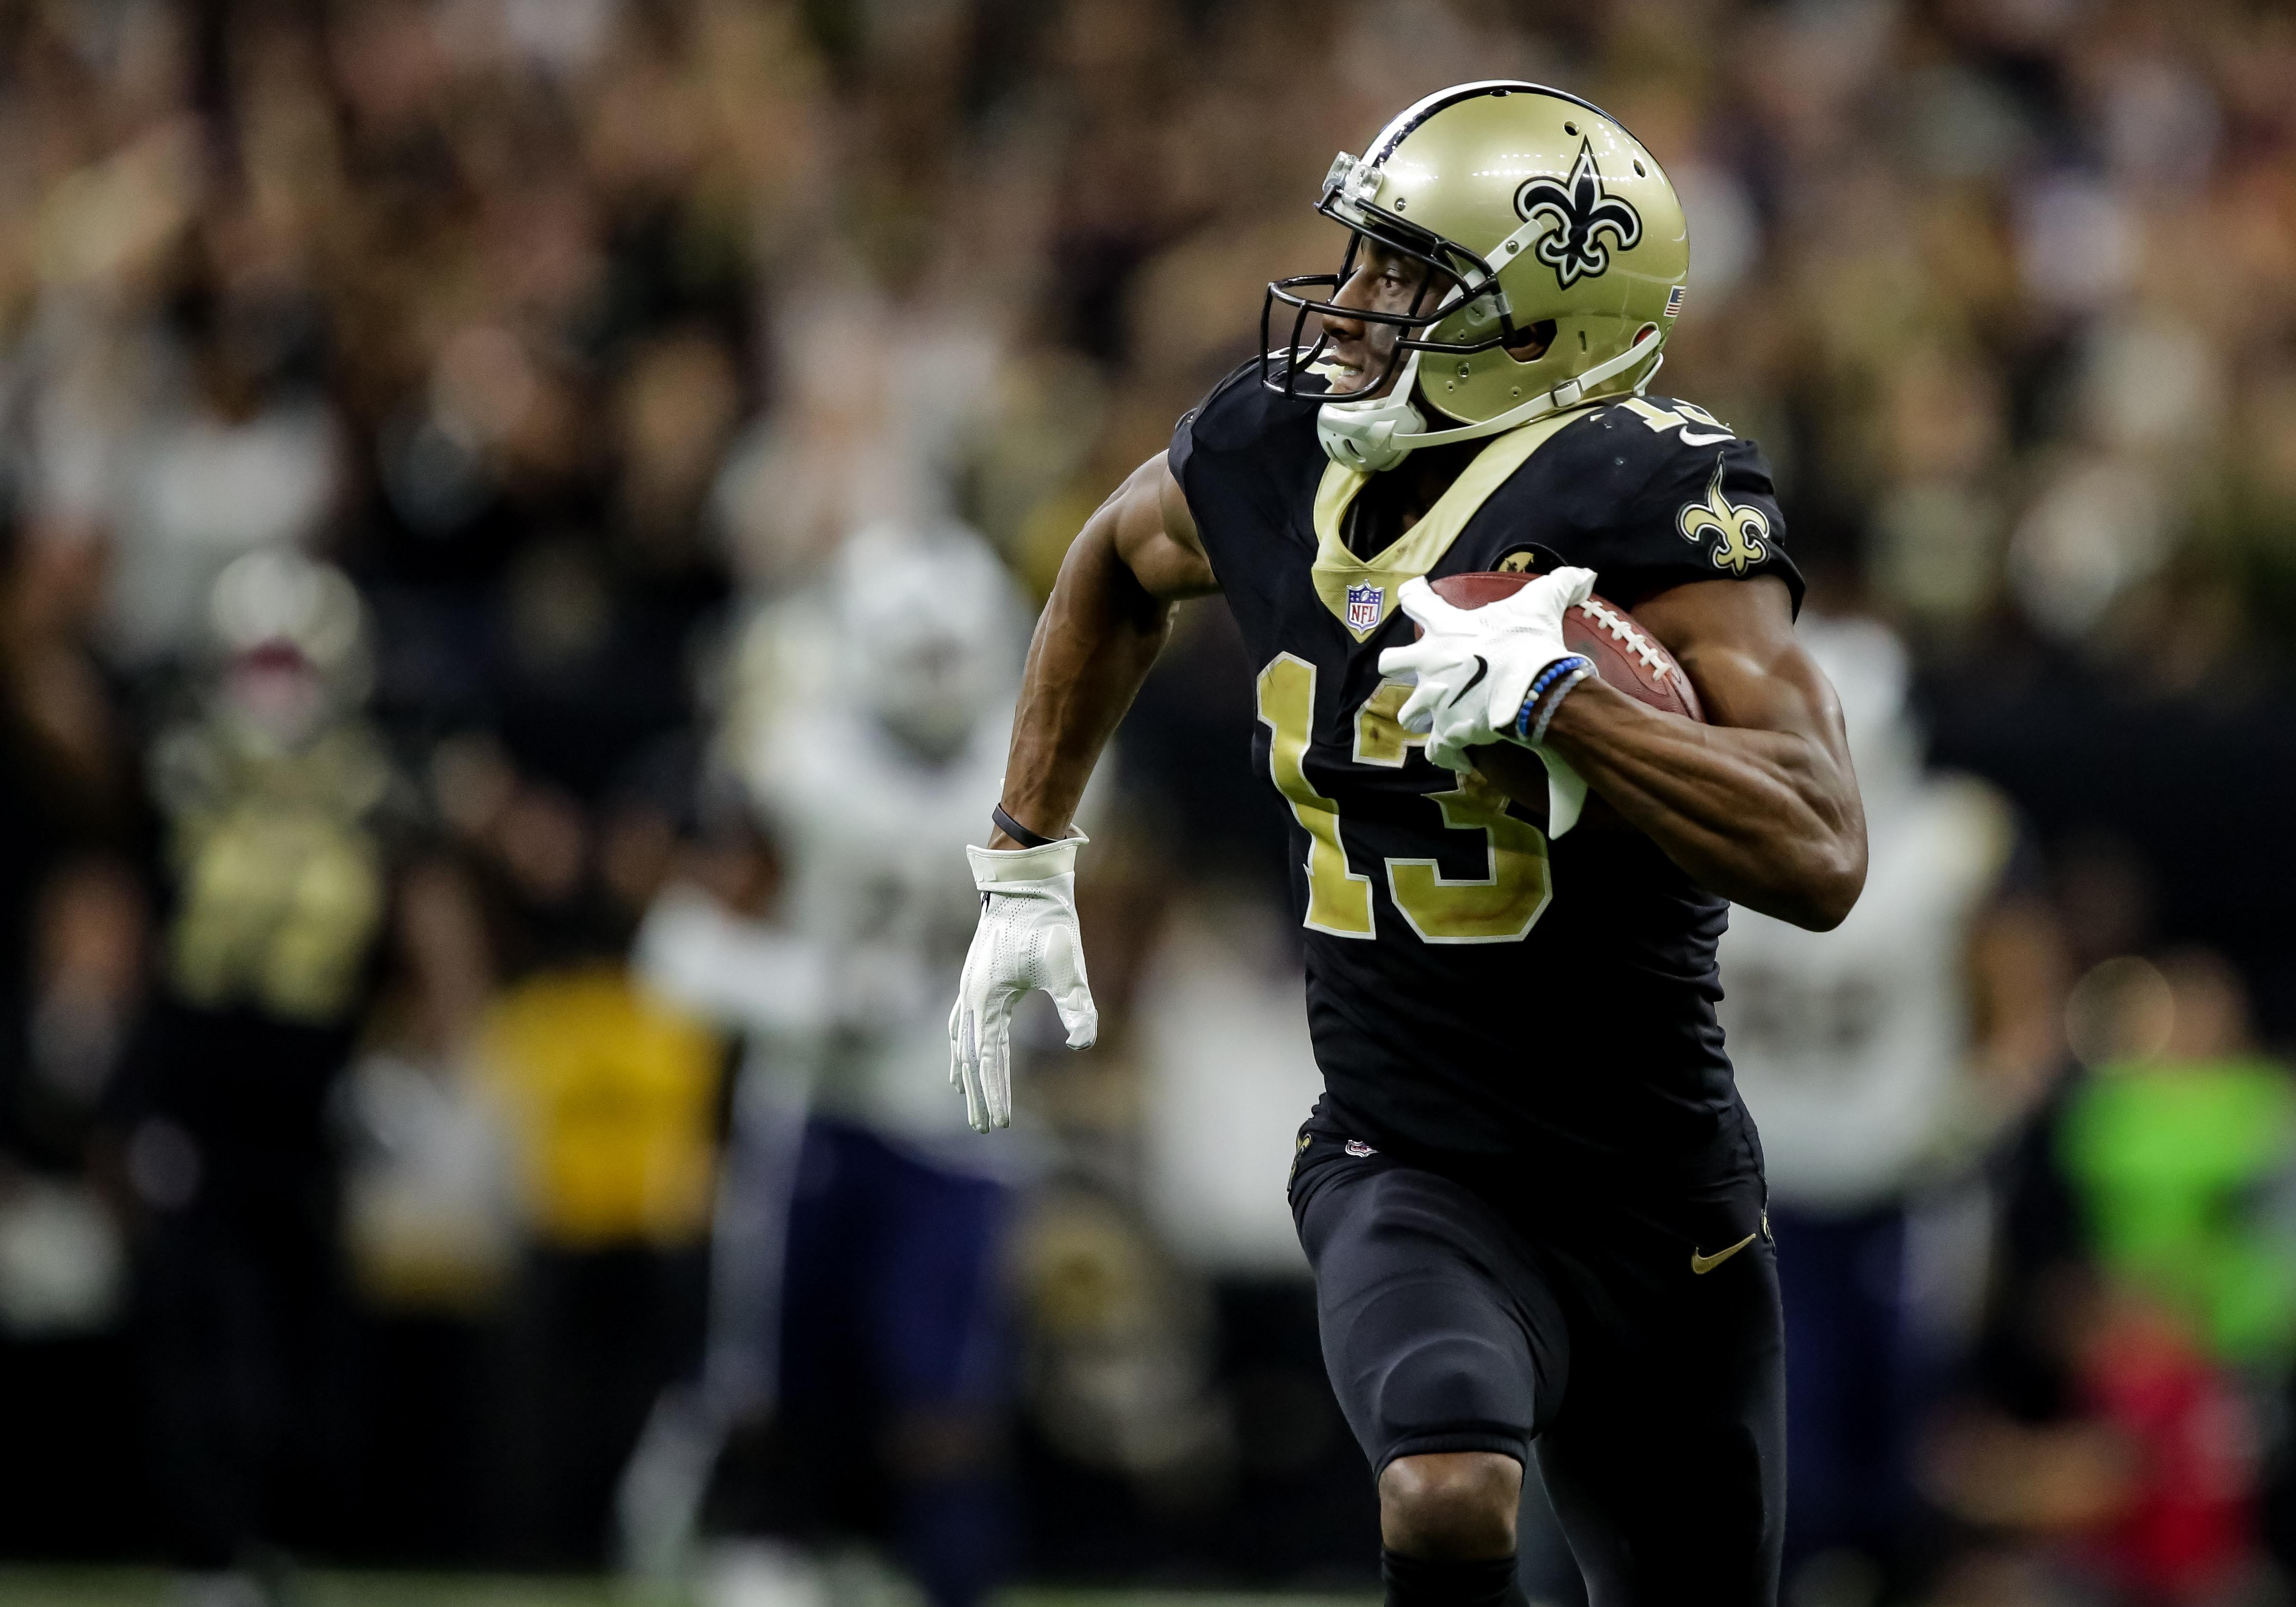 While Dez Bryant idea implodes on Saints, at least Drew Brees can still throw to rising star